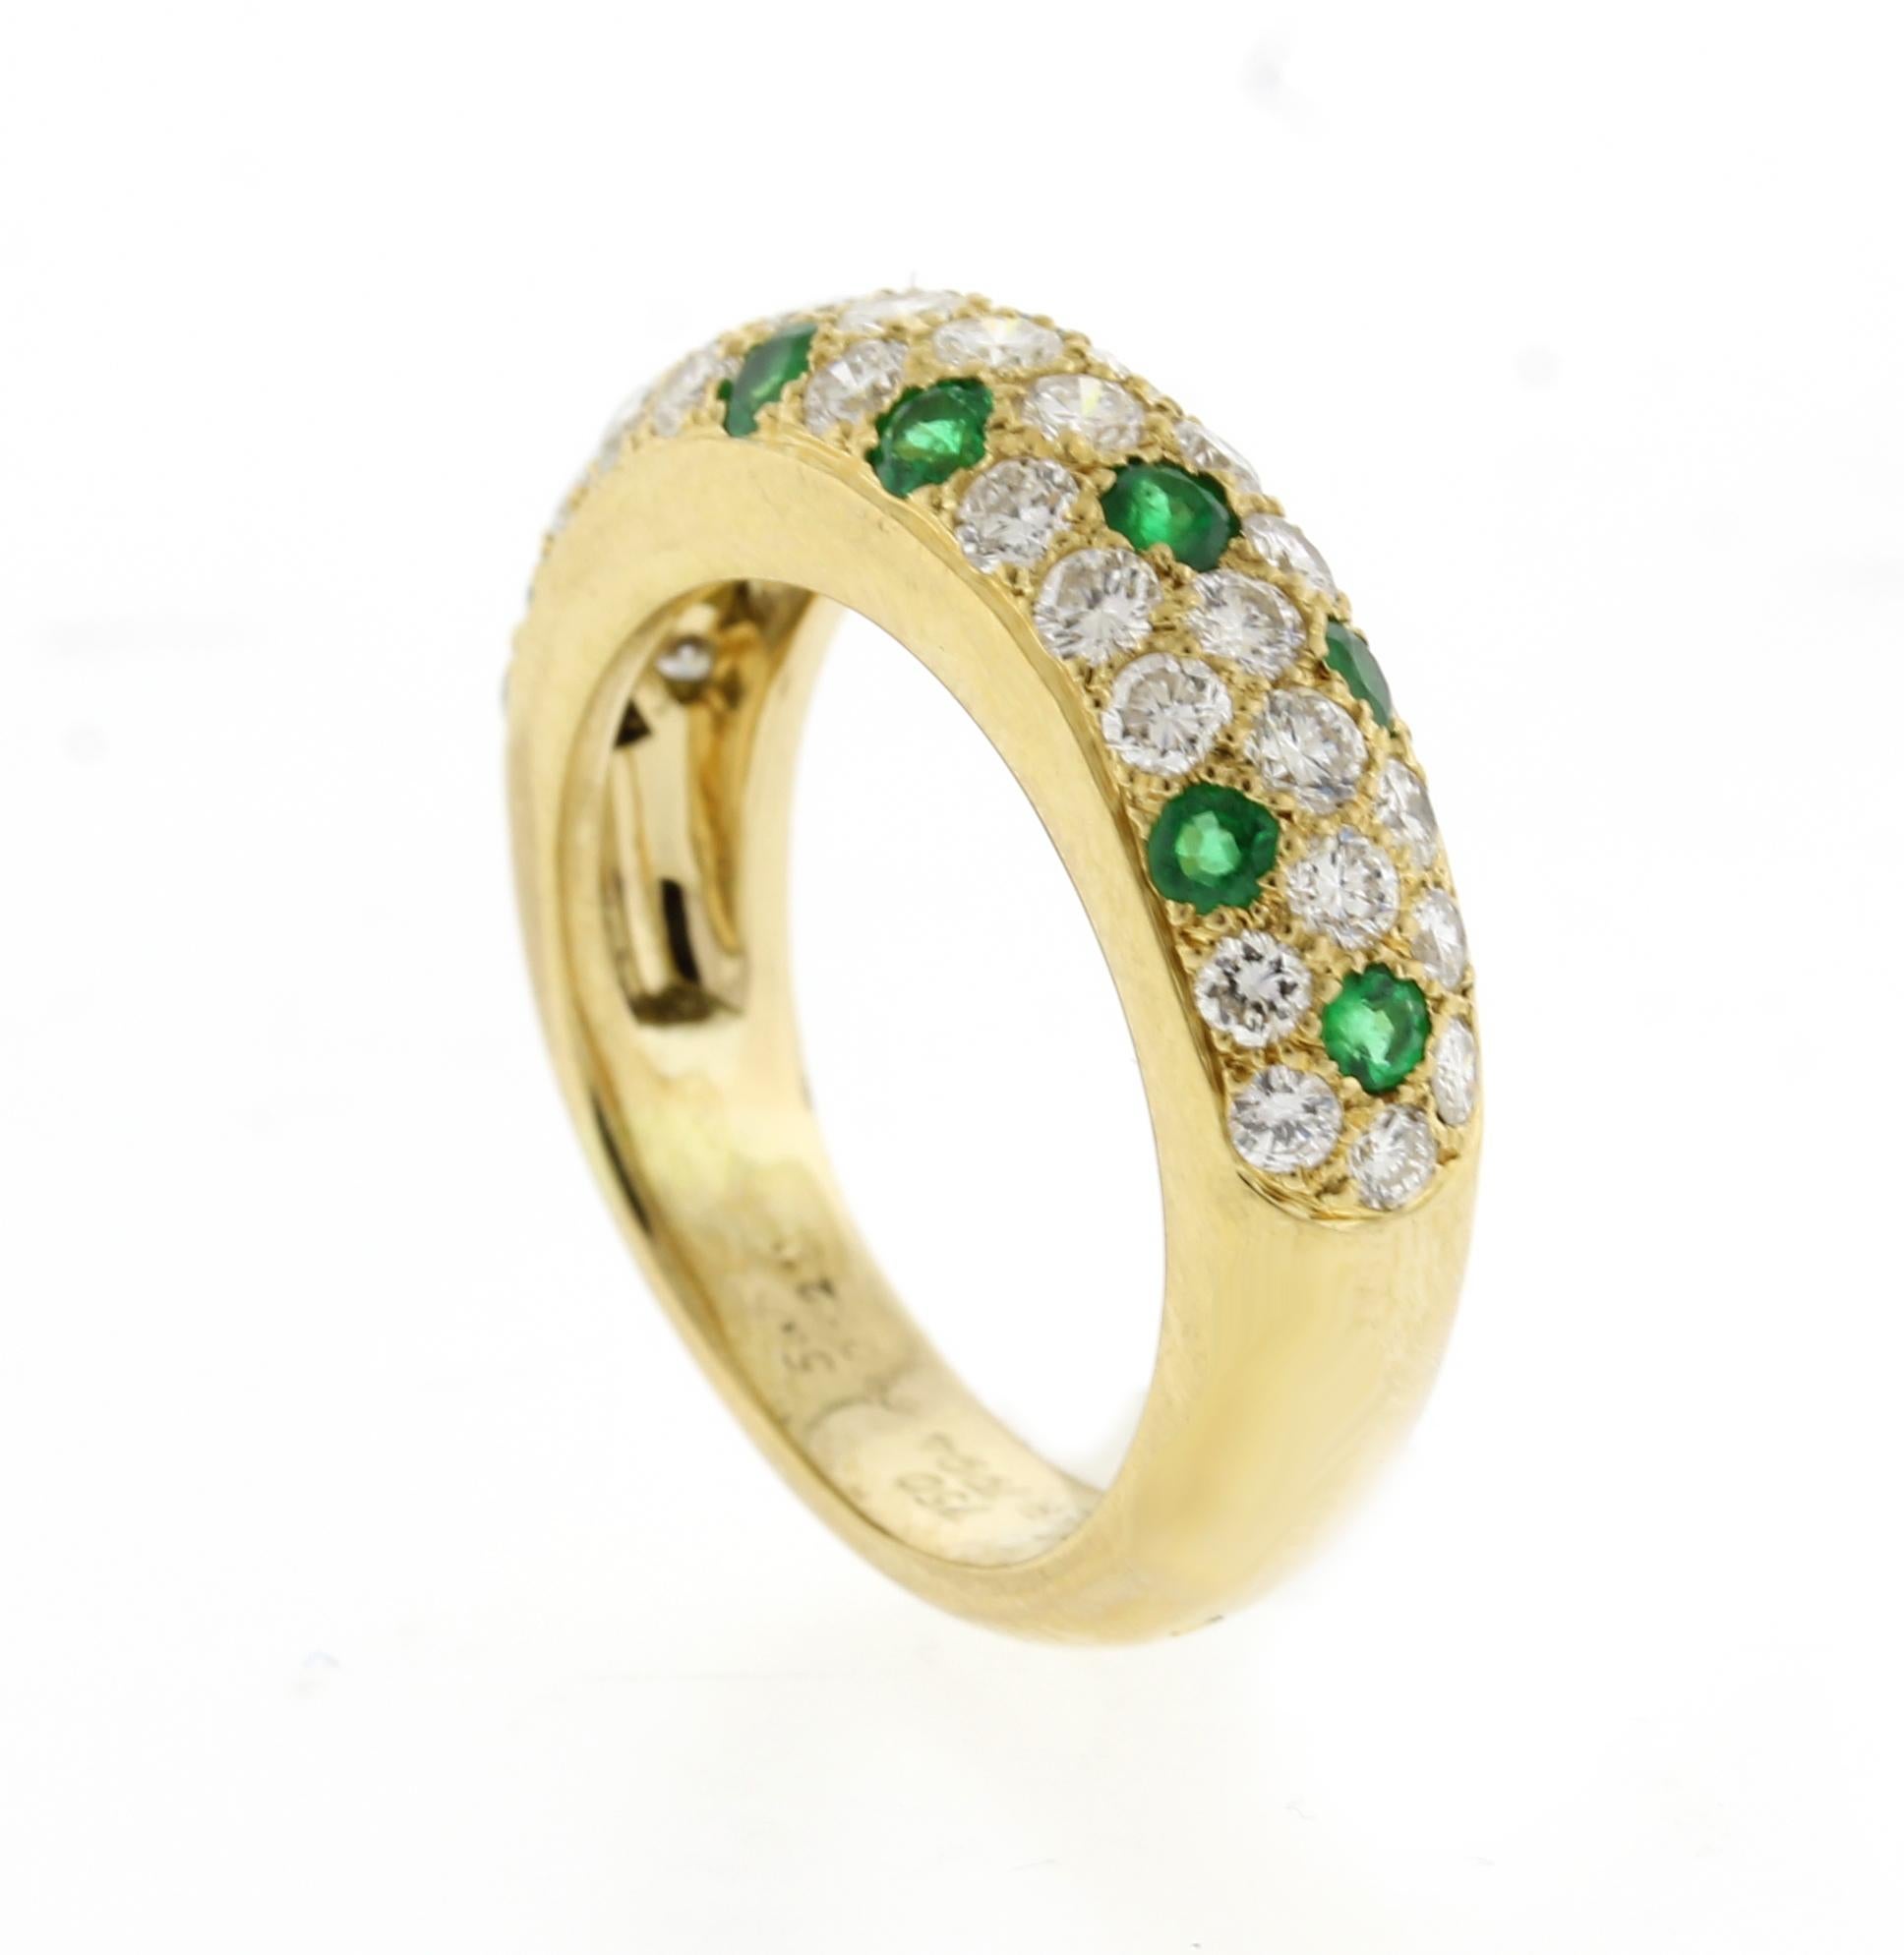 From Cartier's mimi collection of pave diamond and gemstone rings. This sophisticated diamond and vivid green emerald ring.  
• Designer: Cartier
•  18 karat gold
•  Circa:  Late 1990s
•  Size: 54  6 ¾ US
•  6.4mm wide tapering to 4.3mm
•  33